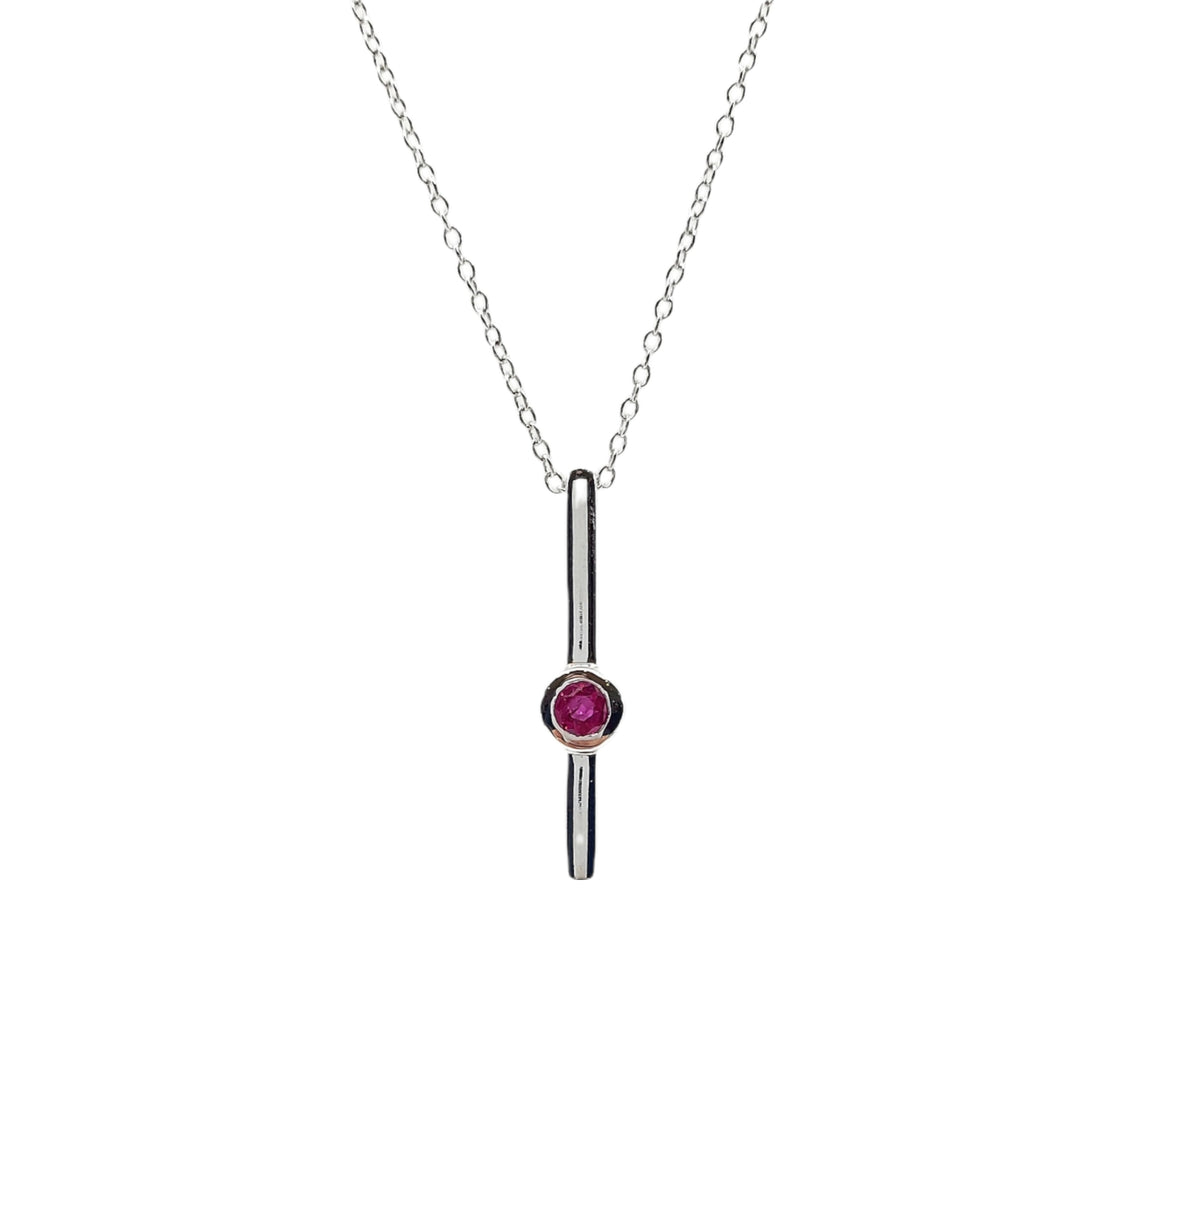 10K White Gold 0.08cttw (2.50mm) Ruby Necklace with Cable Chain (Spring Clasp) - Adjustable 17 - 18 Inches